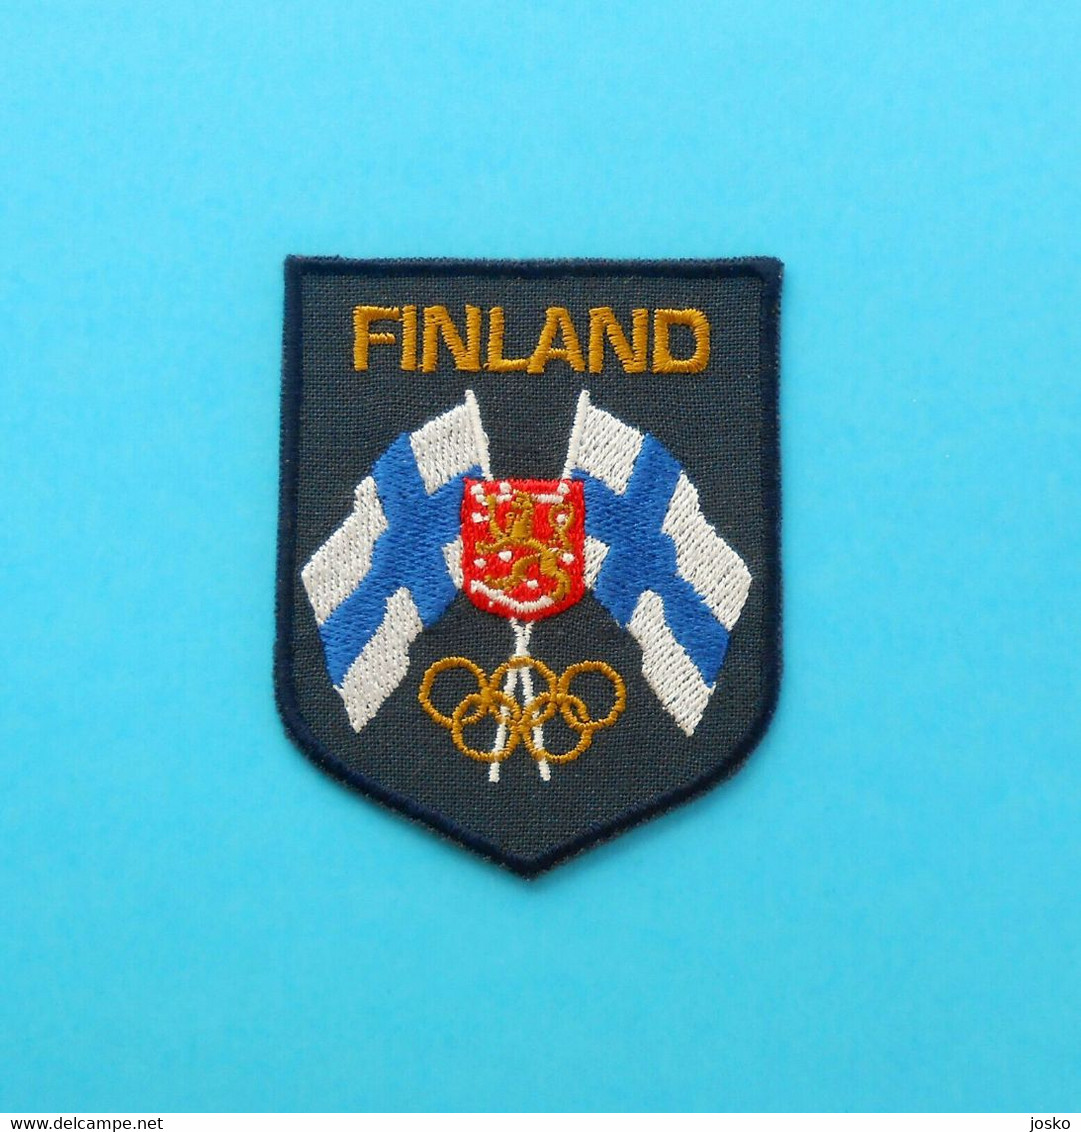 FINLAND NOC - Nice Rare Olympics Patch * Olympic Games Olympiad Olympia Olympiade Olimpische Spiele Olimpici - Habillement, Souvenirs & Autres